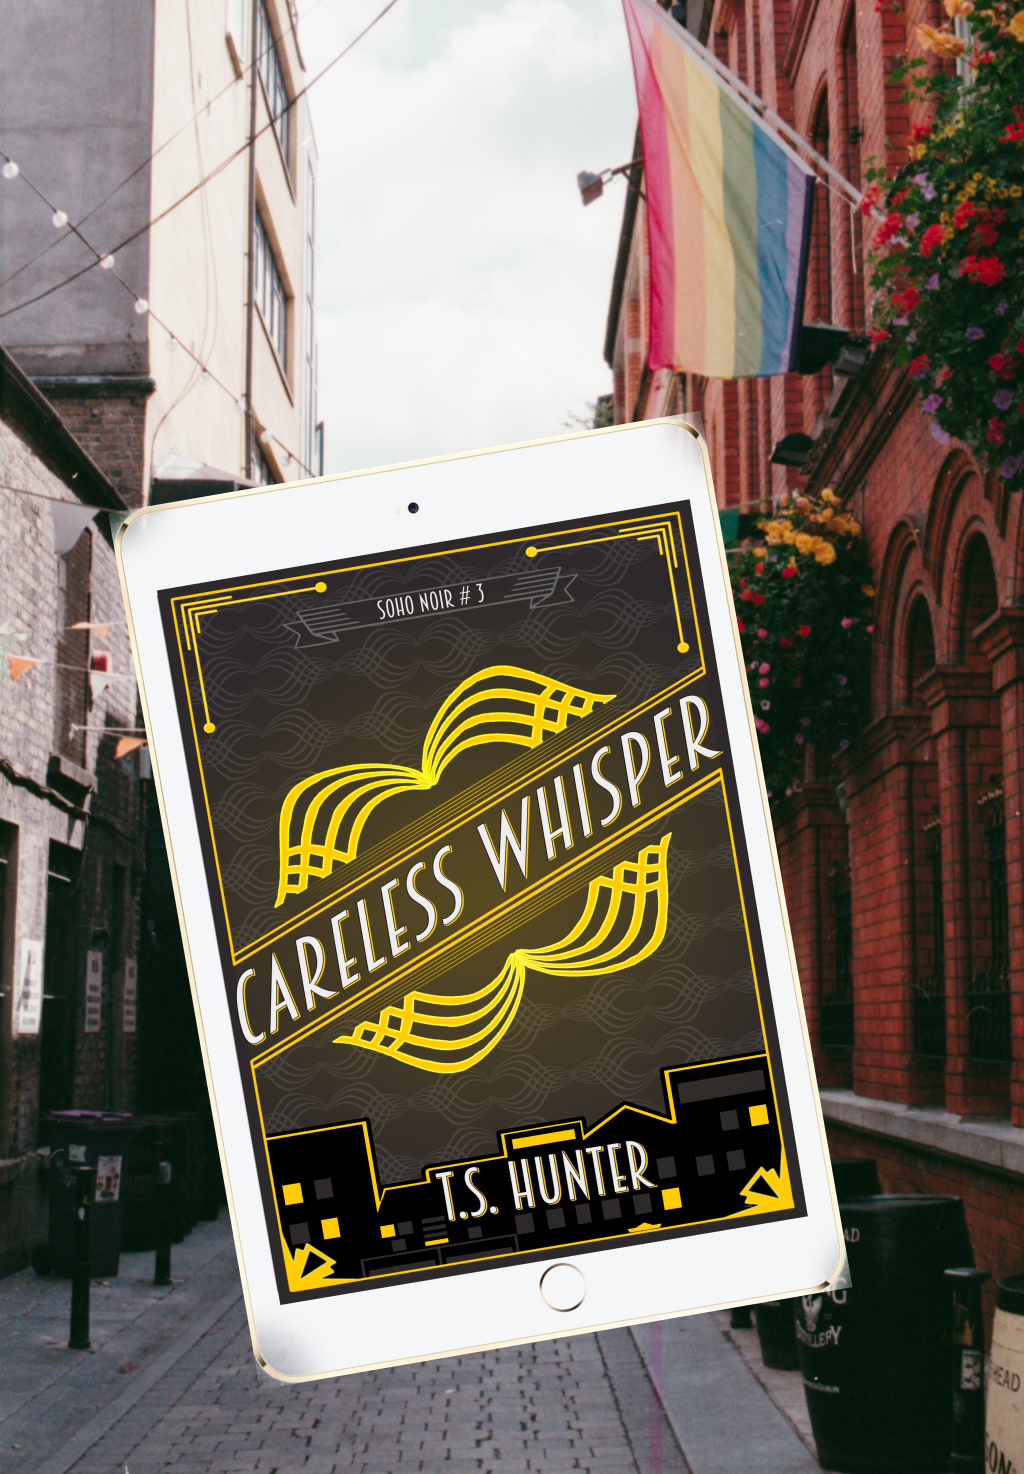 Careless Whisper by T S Hunter – Book Review